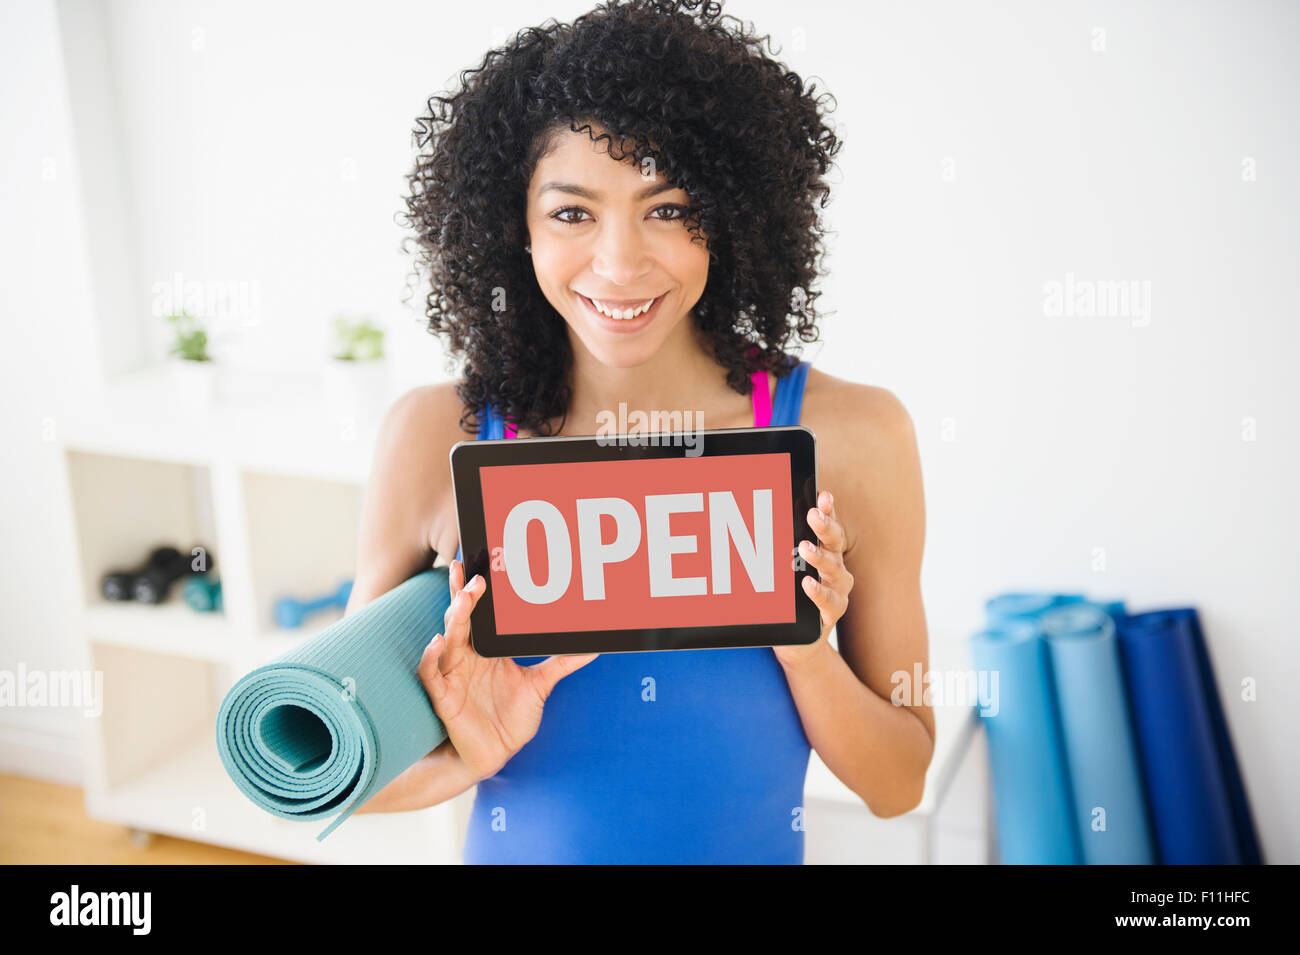 Mixed Race woman holding open sign in yoga studio Banque D'Images